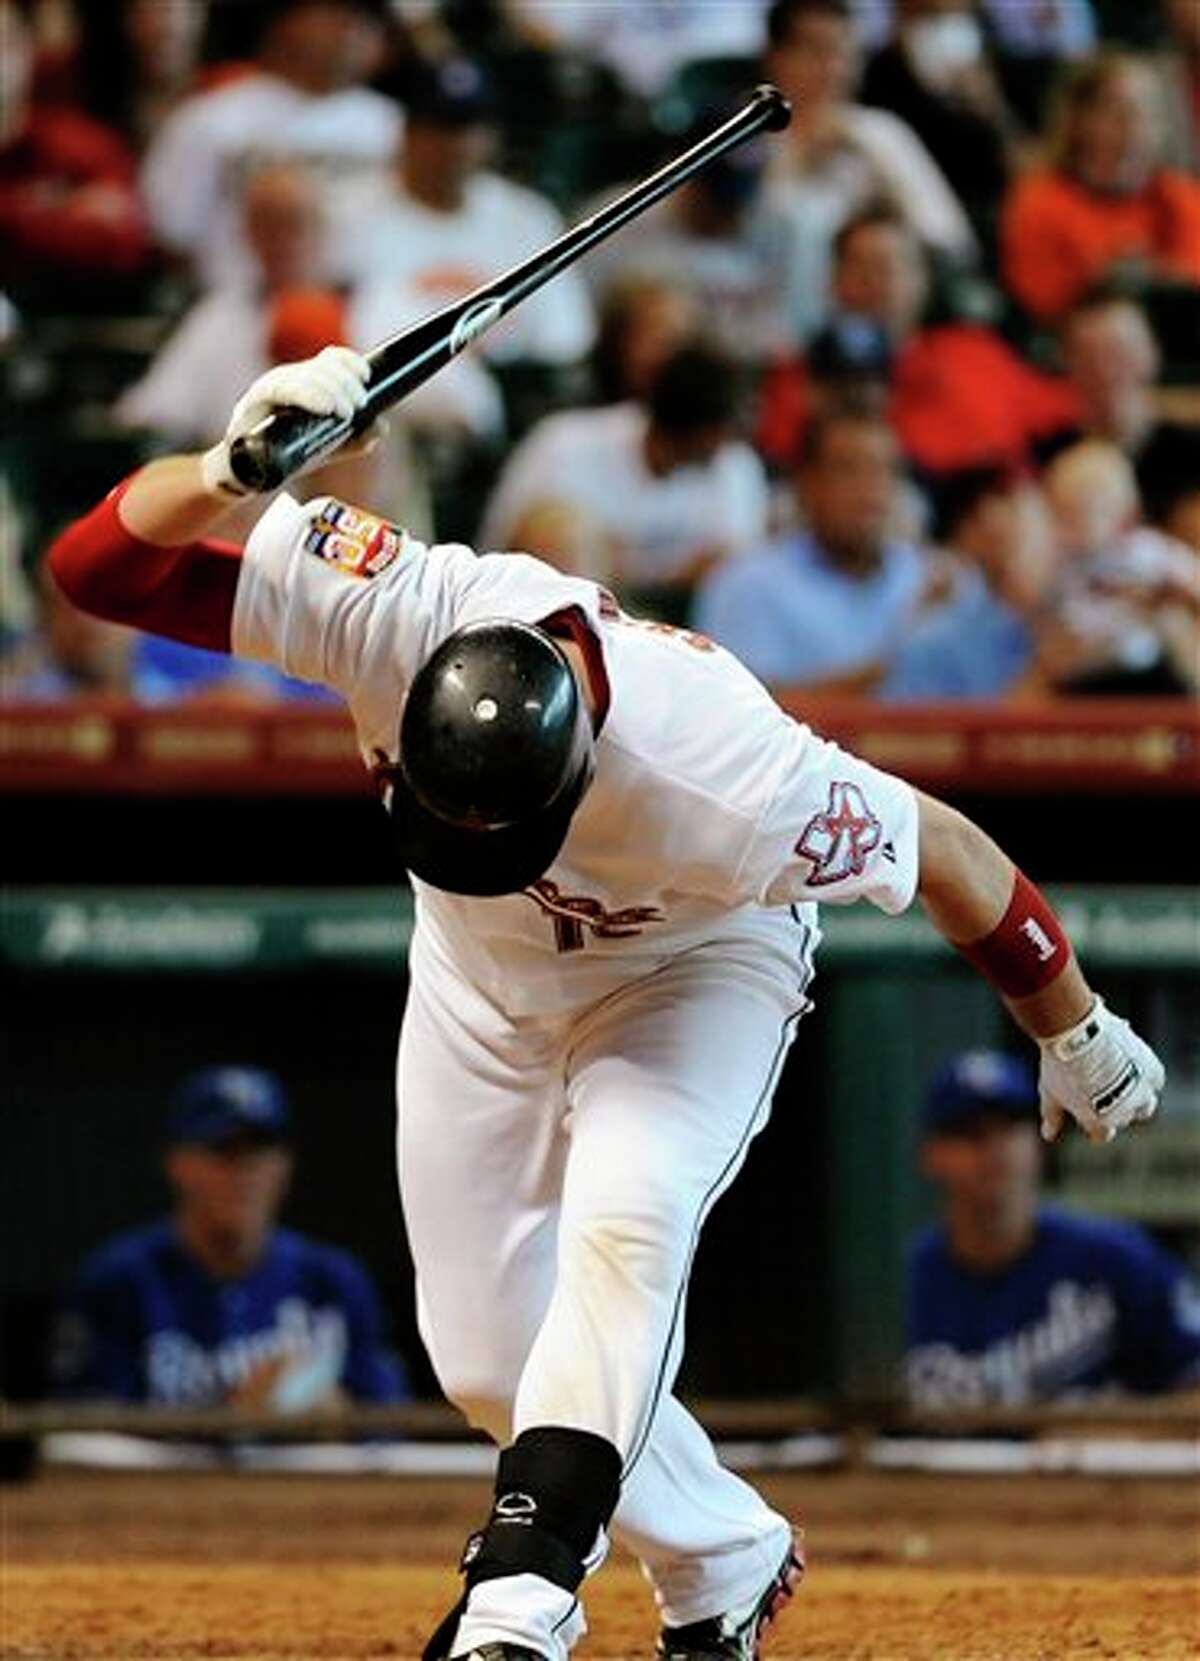 Houston Astros' Chris Snyder slams down his bat after striking out in the sixth inning of a baseball game against the Kansas City Royals, Wednesday, June 20, 2012, in Houston. The Royals won 2-1. (AP Photo/Pat Sullivan)